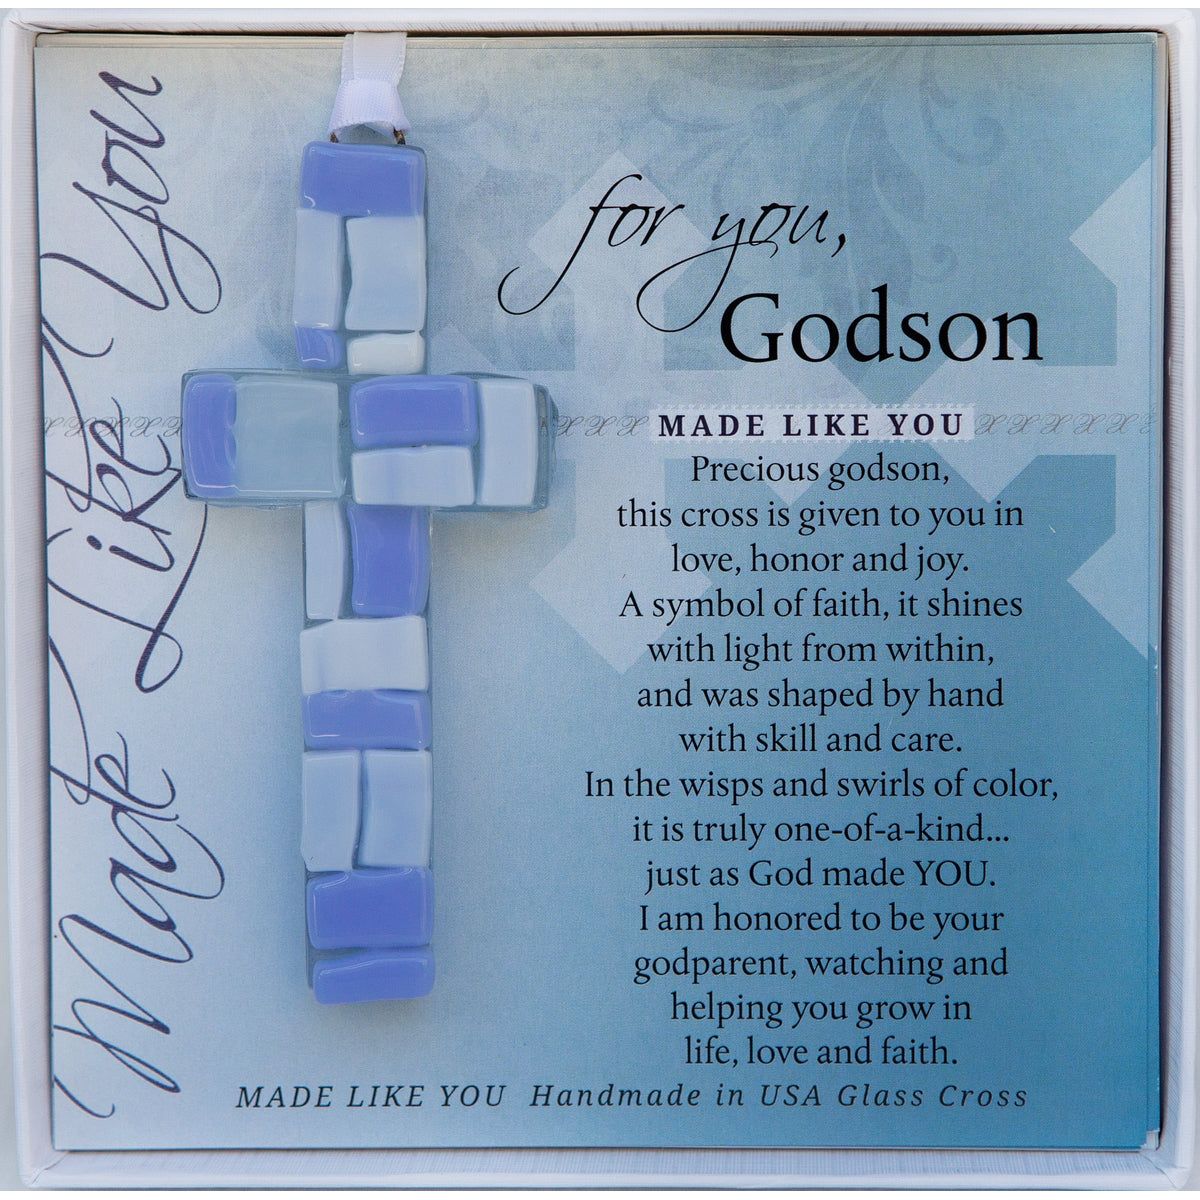 Godson Gift - Handmade 4" blue mosaic glass cross and "For You, Godson" sentiment in white box with clear lid.